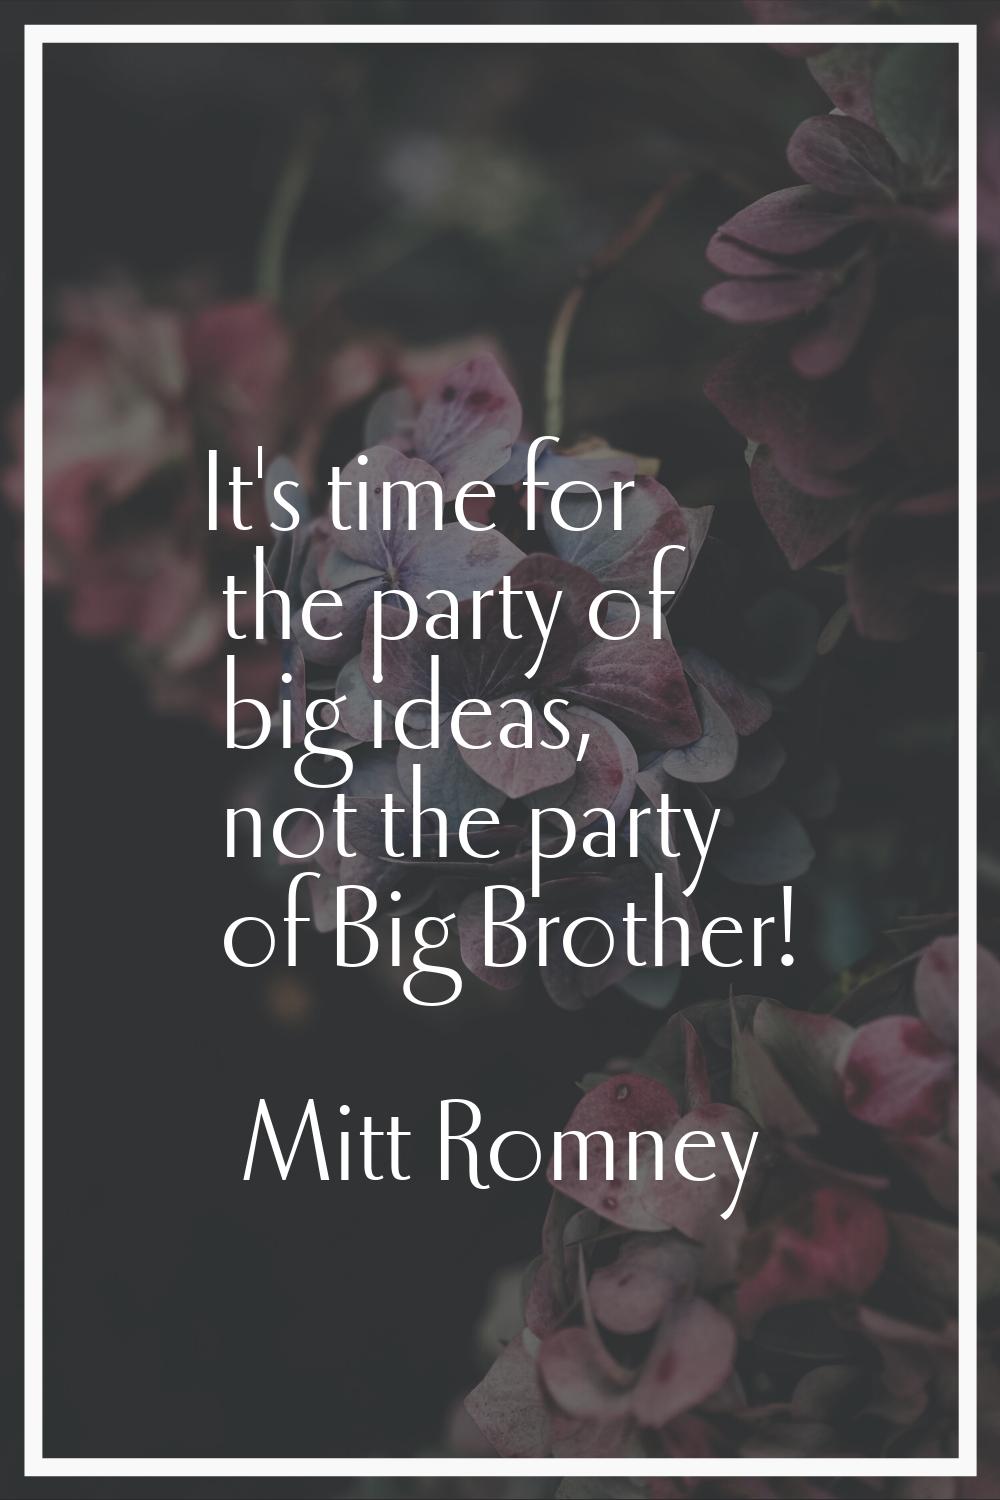 It's time for the party of big ideas, not the party of Big Brother!